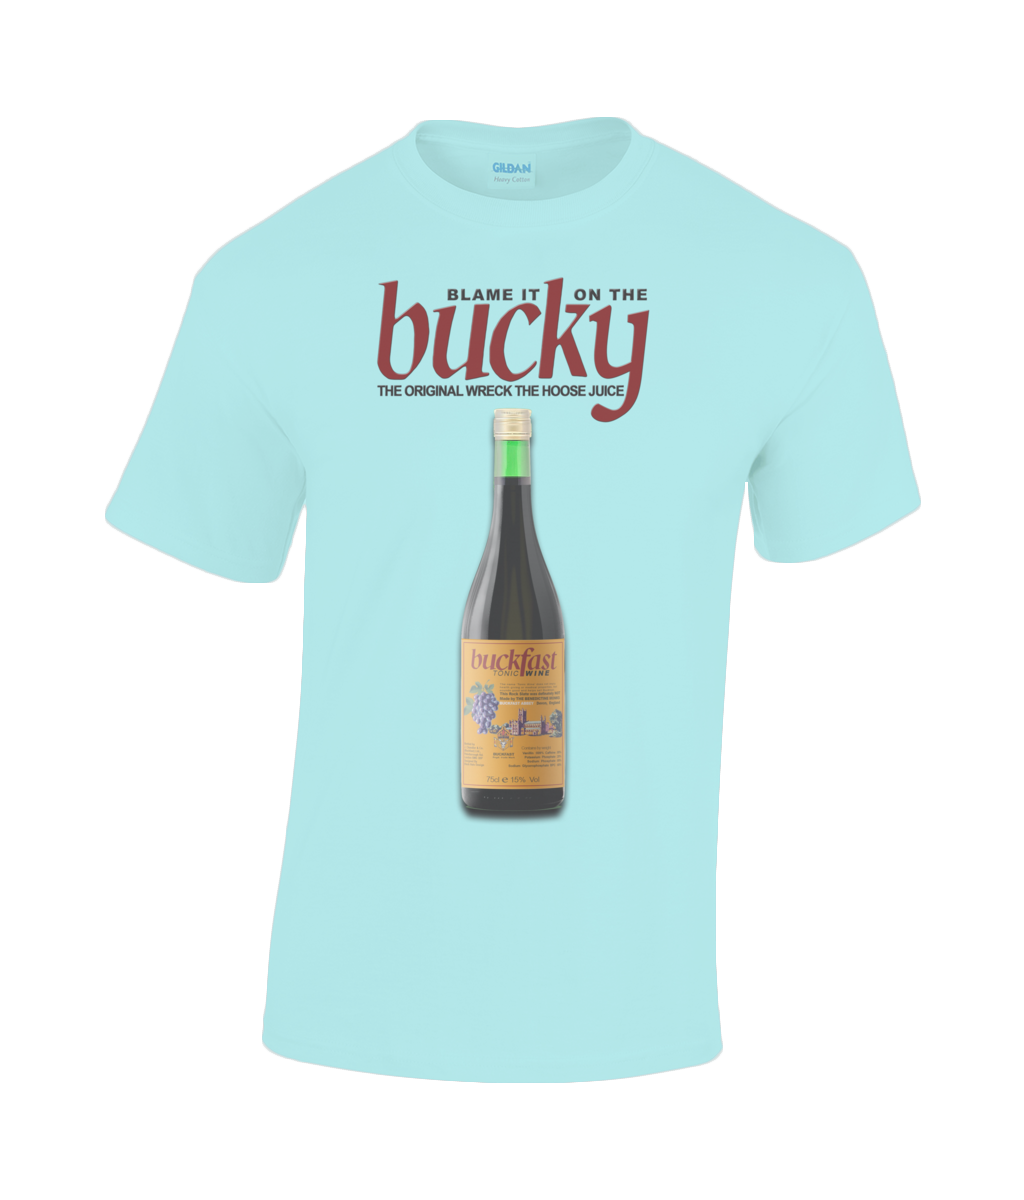 Buckfast: Blame it on the Bucky T-Shirt in choice of sizes